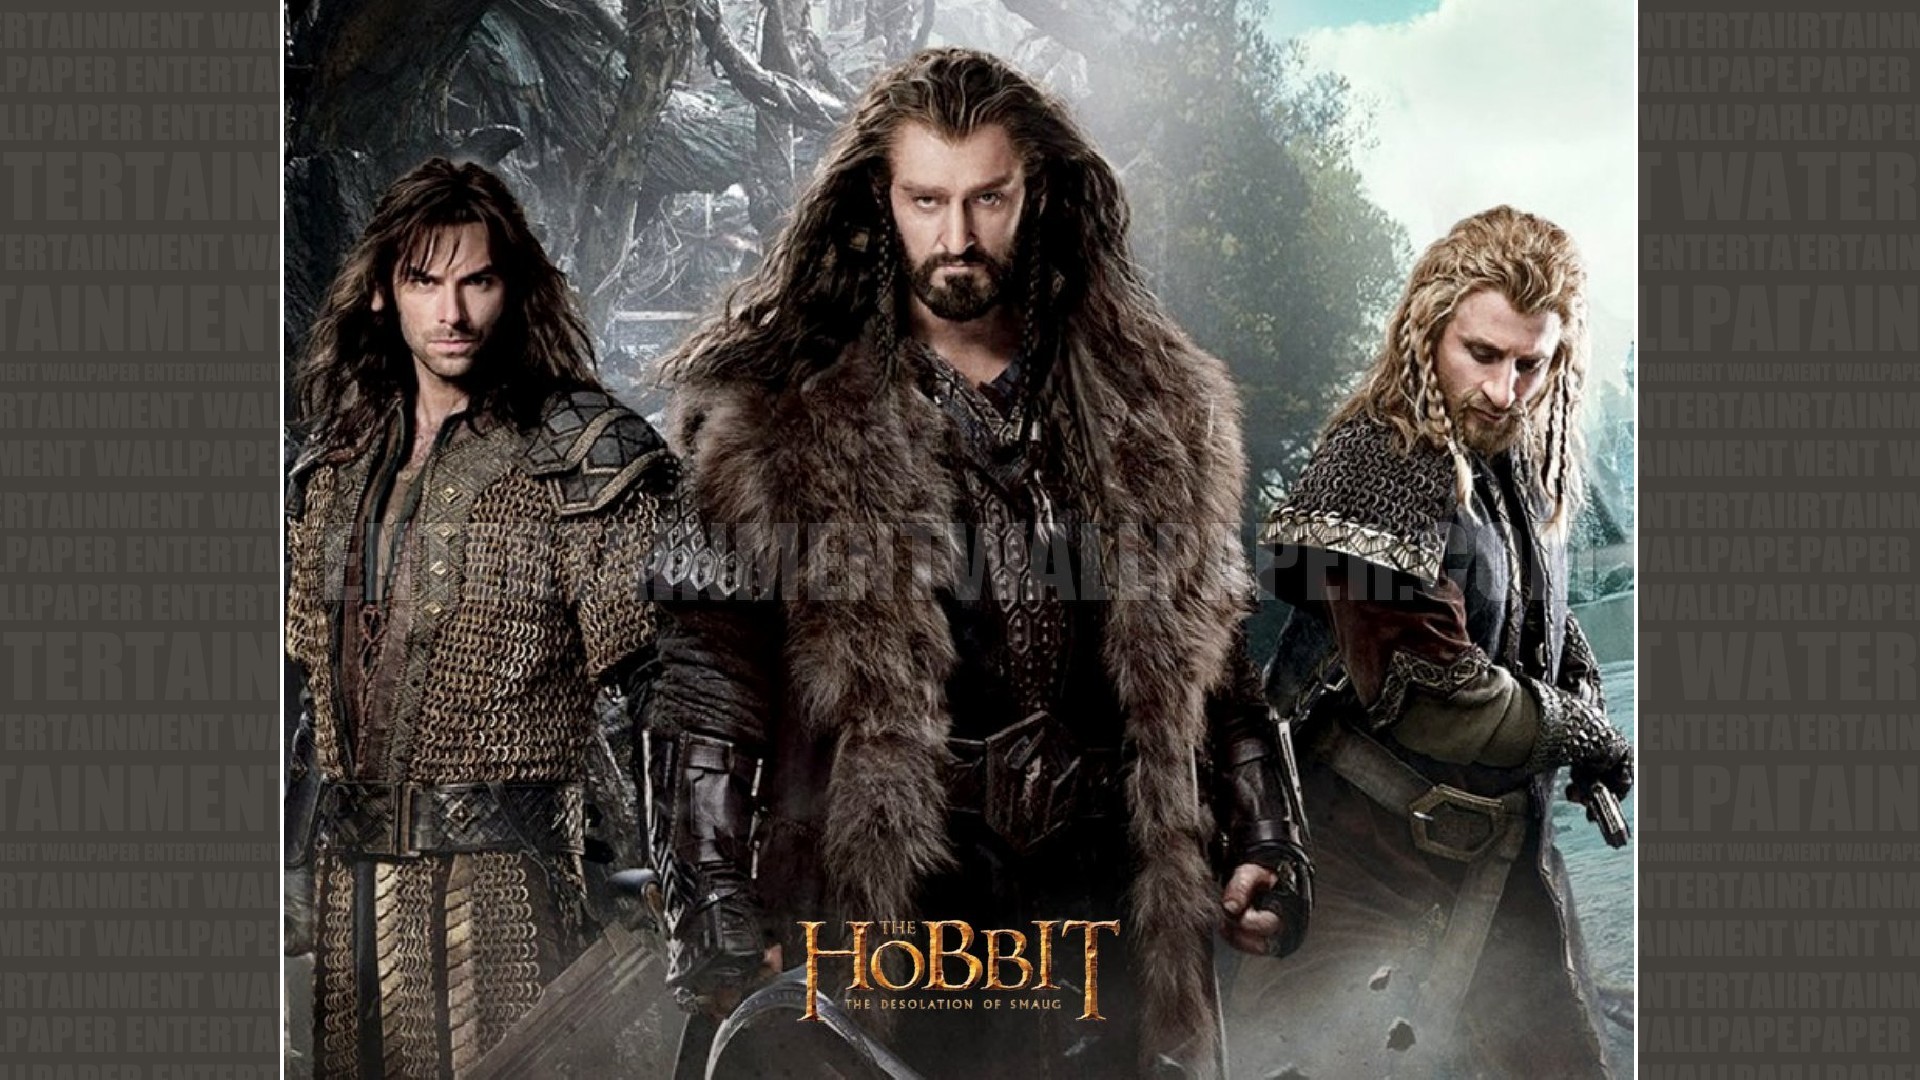 The Hobbit The Desolation of Smaug Wallpaper – Original size, download now